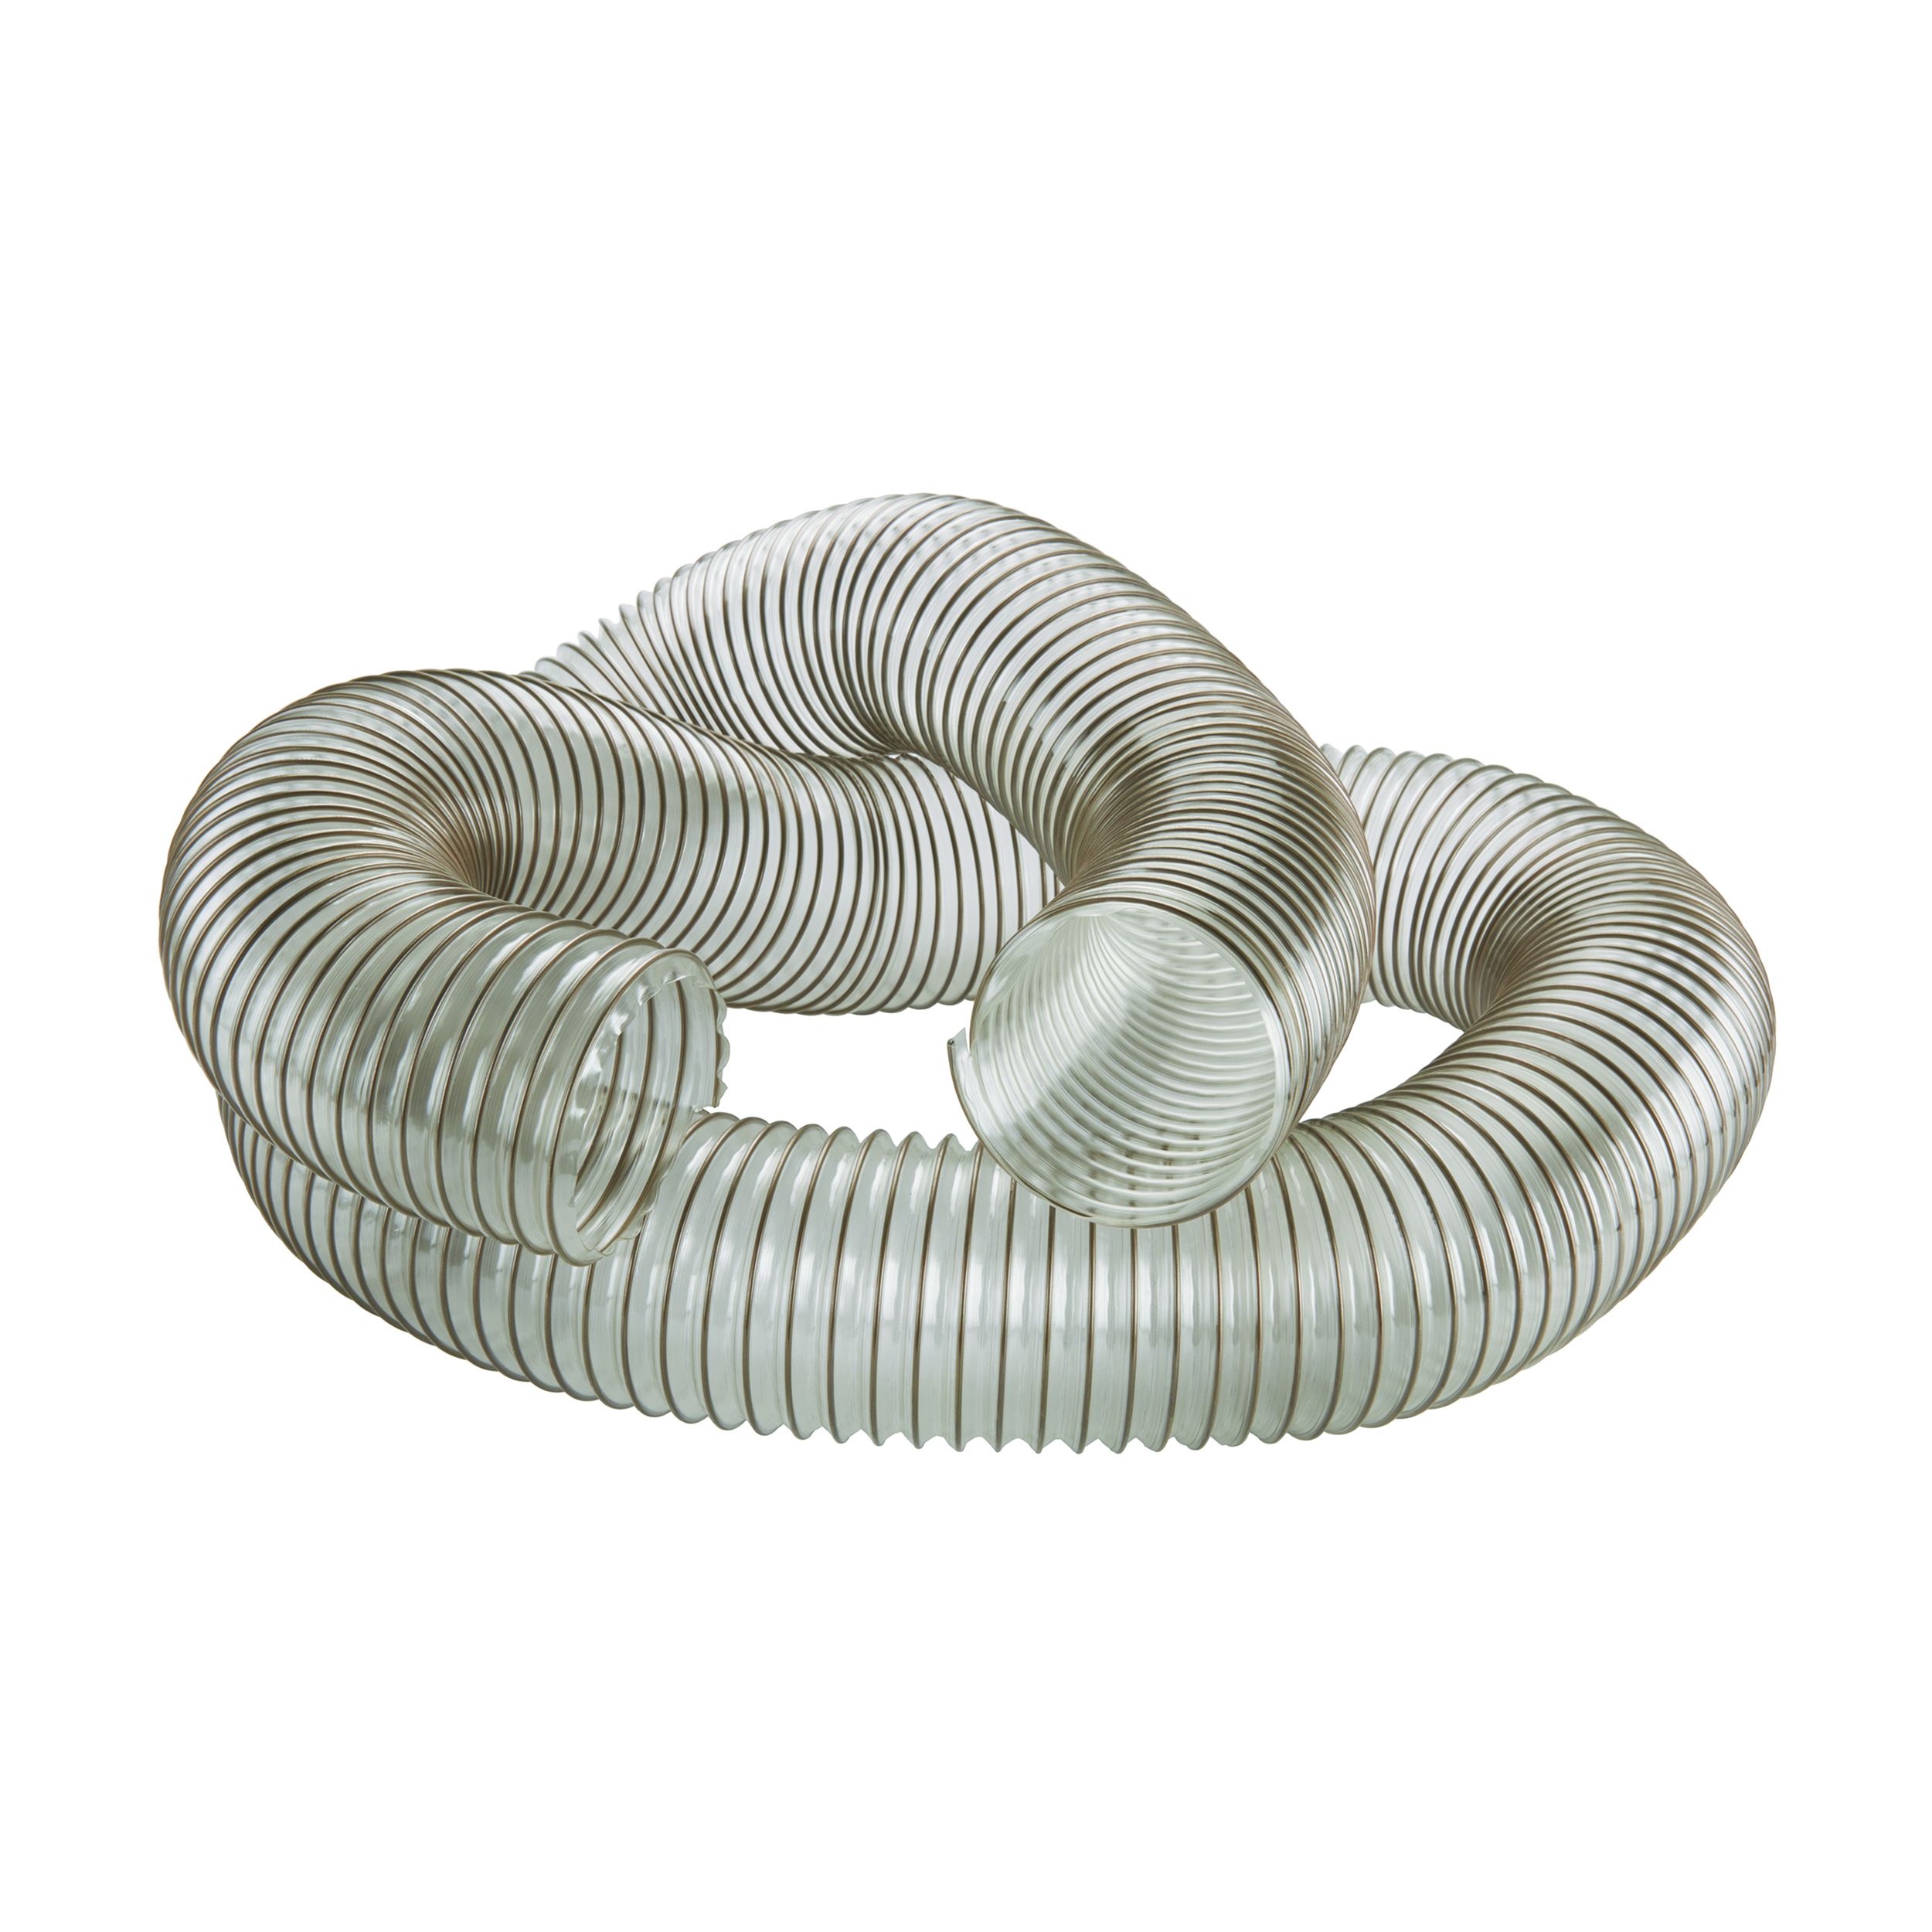 Hi-tech Duravent 4in X 10ft Uld Urethane Dust Collection Hose